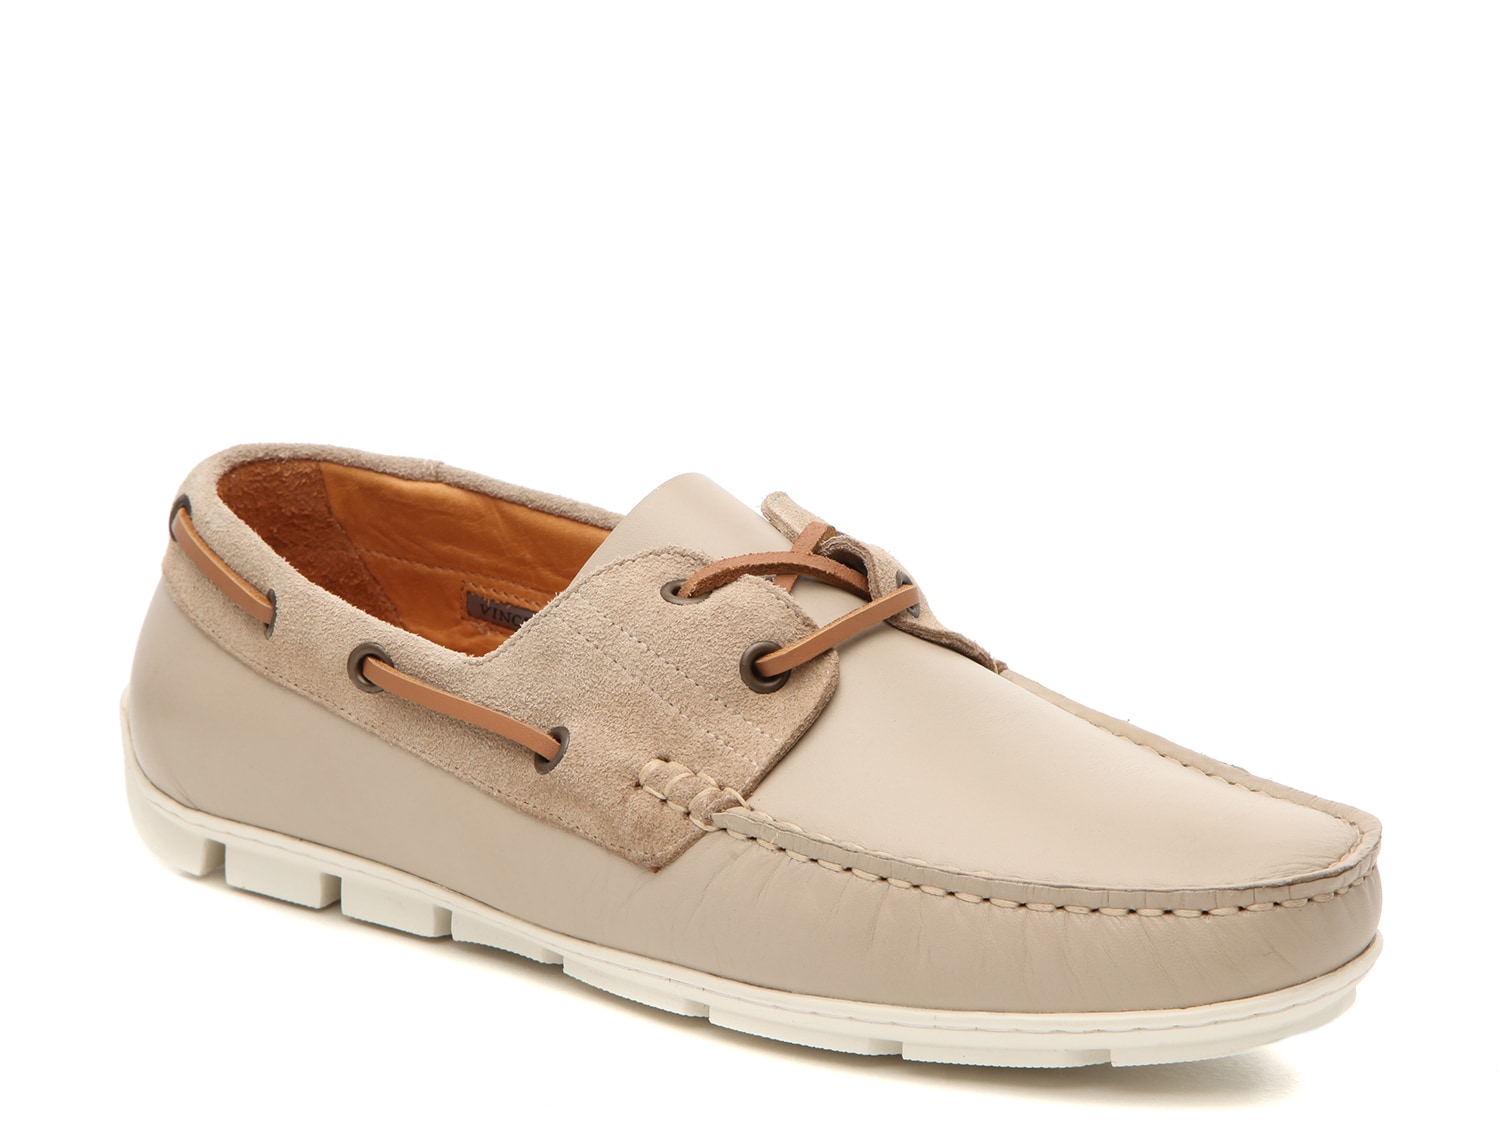 Vince Camuto Don Boat Shoe - Free Shipping | DSW